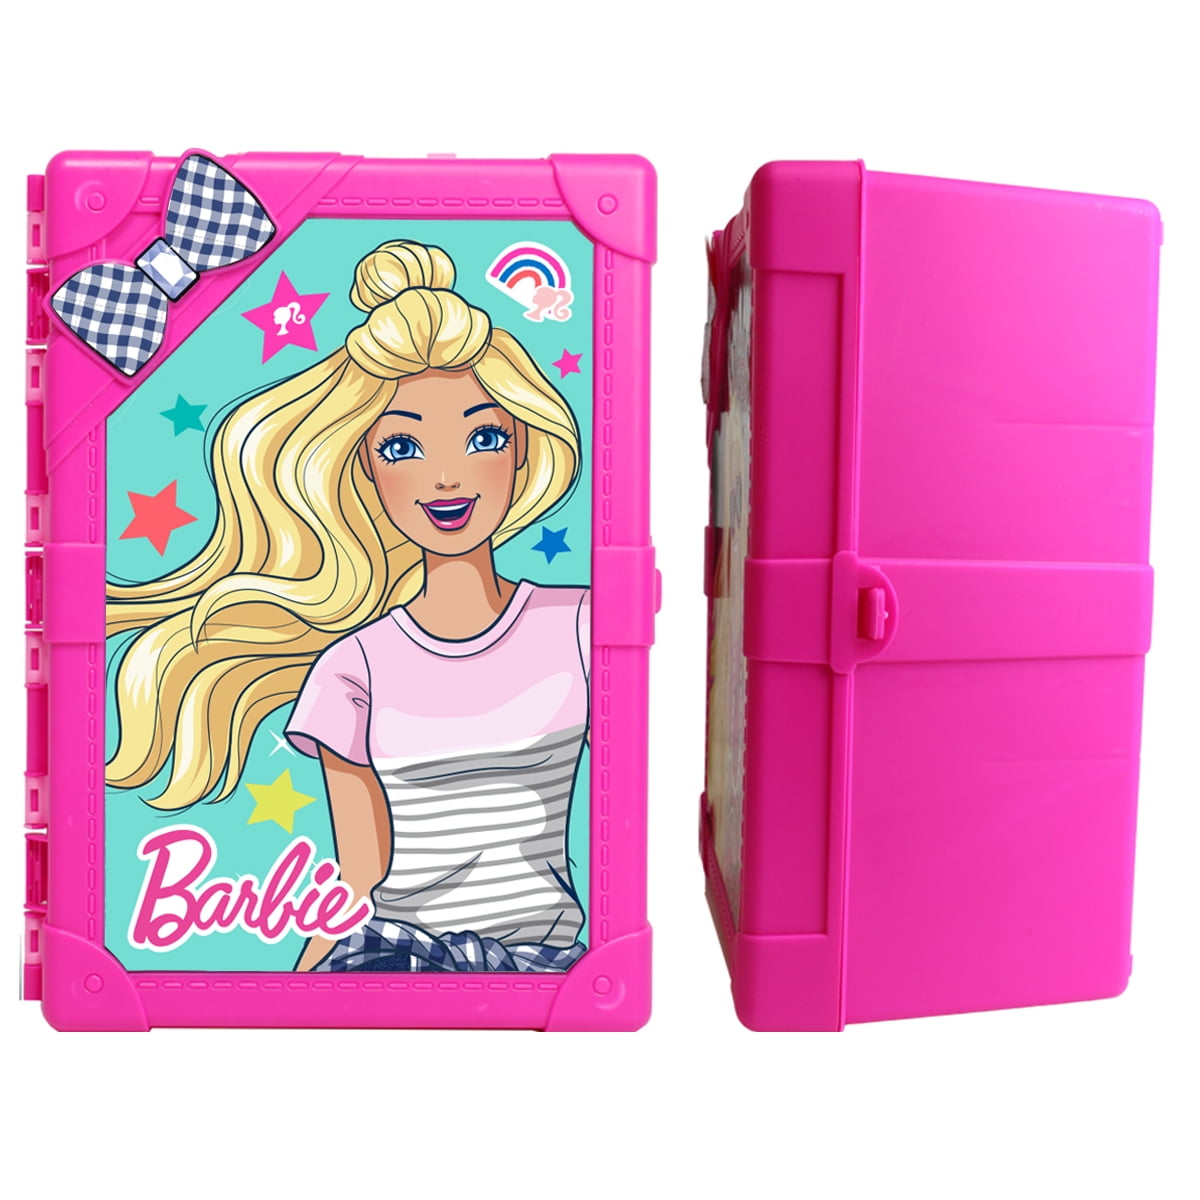 Barbie Style Wardrobe Closet Pink Portable Sparkle Fashion Play Store & Carry! 